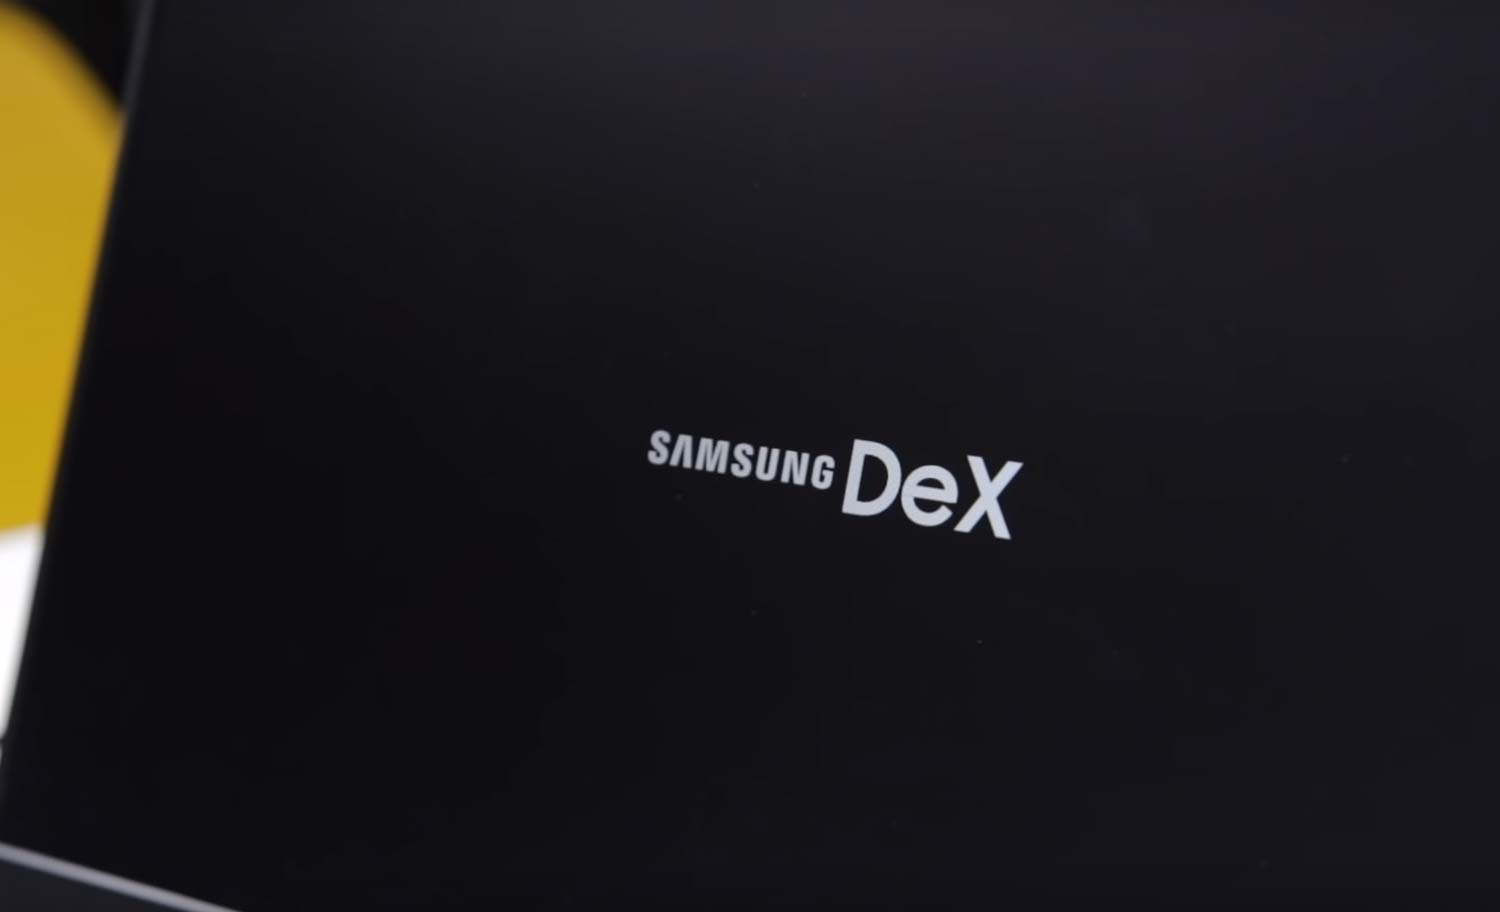 How to turn your Galaxy S10 into PC setup using Samsung Dex